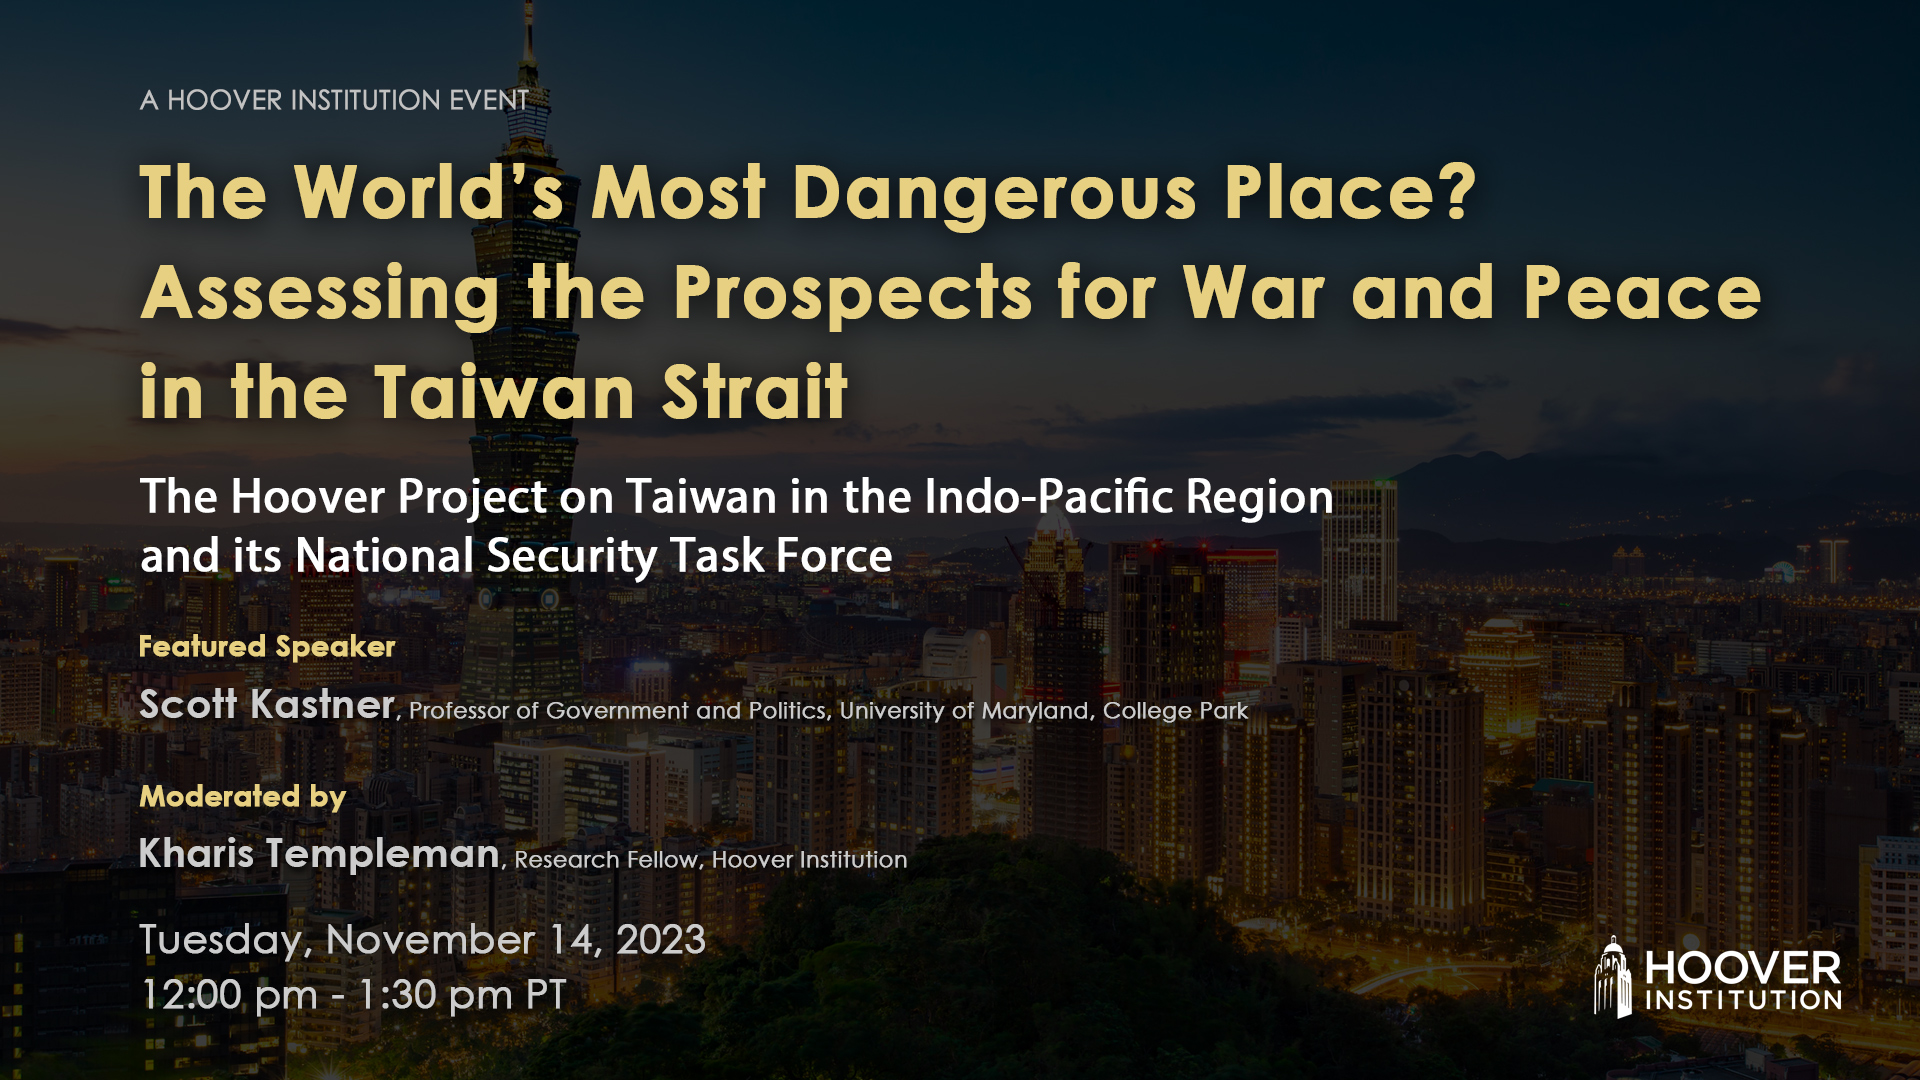 The World’s Most Dangerous Place? Assessing the Prospects for War and Peace in the Taiwan Strait, November 14, 2023